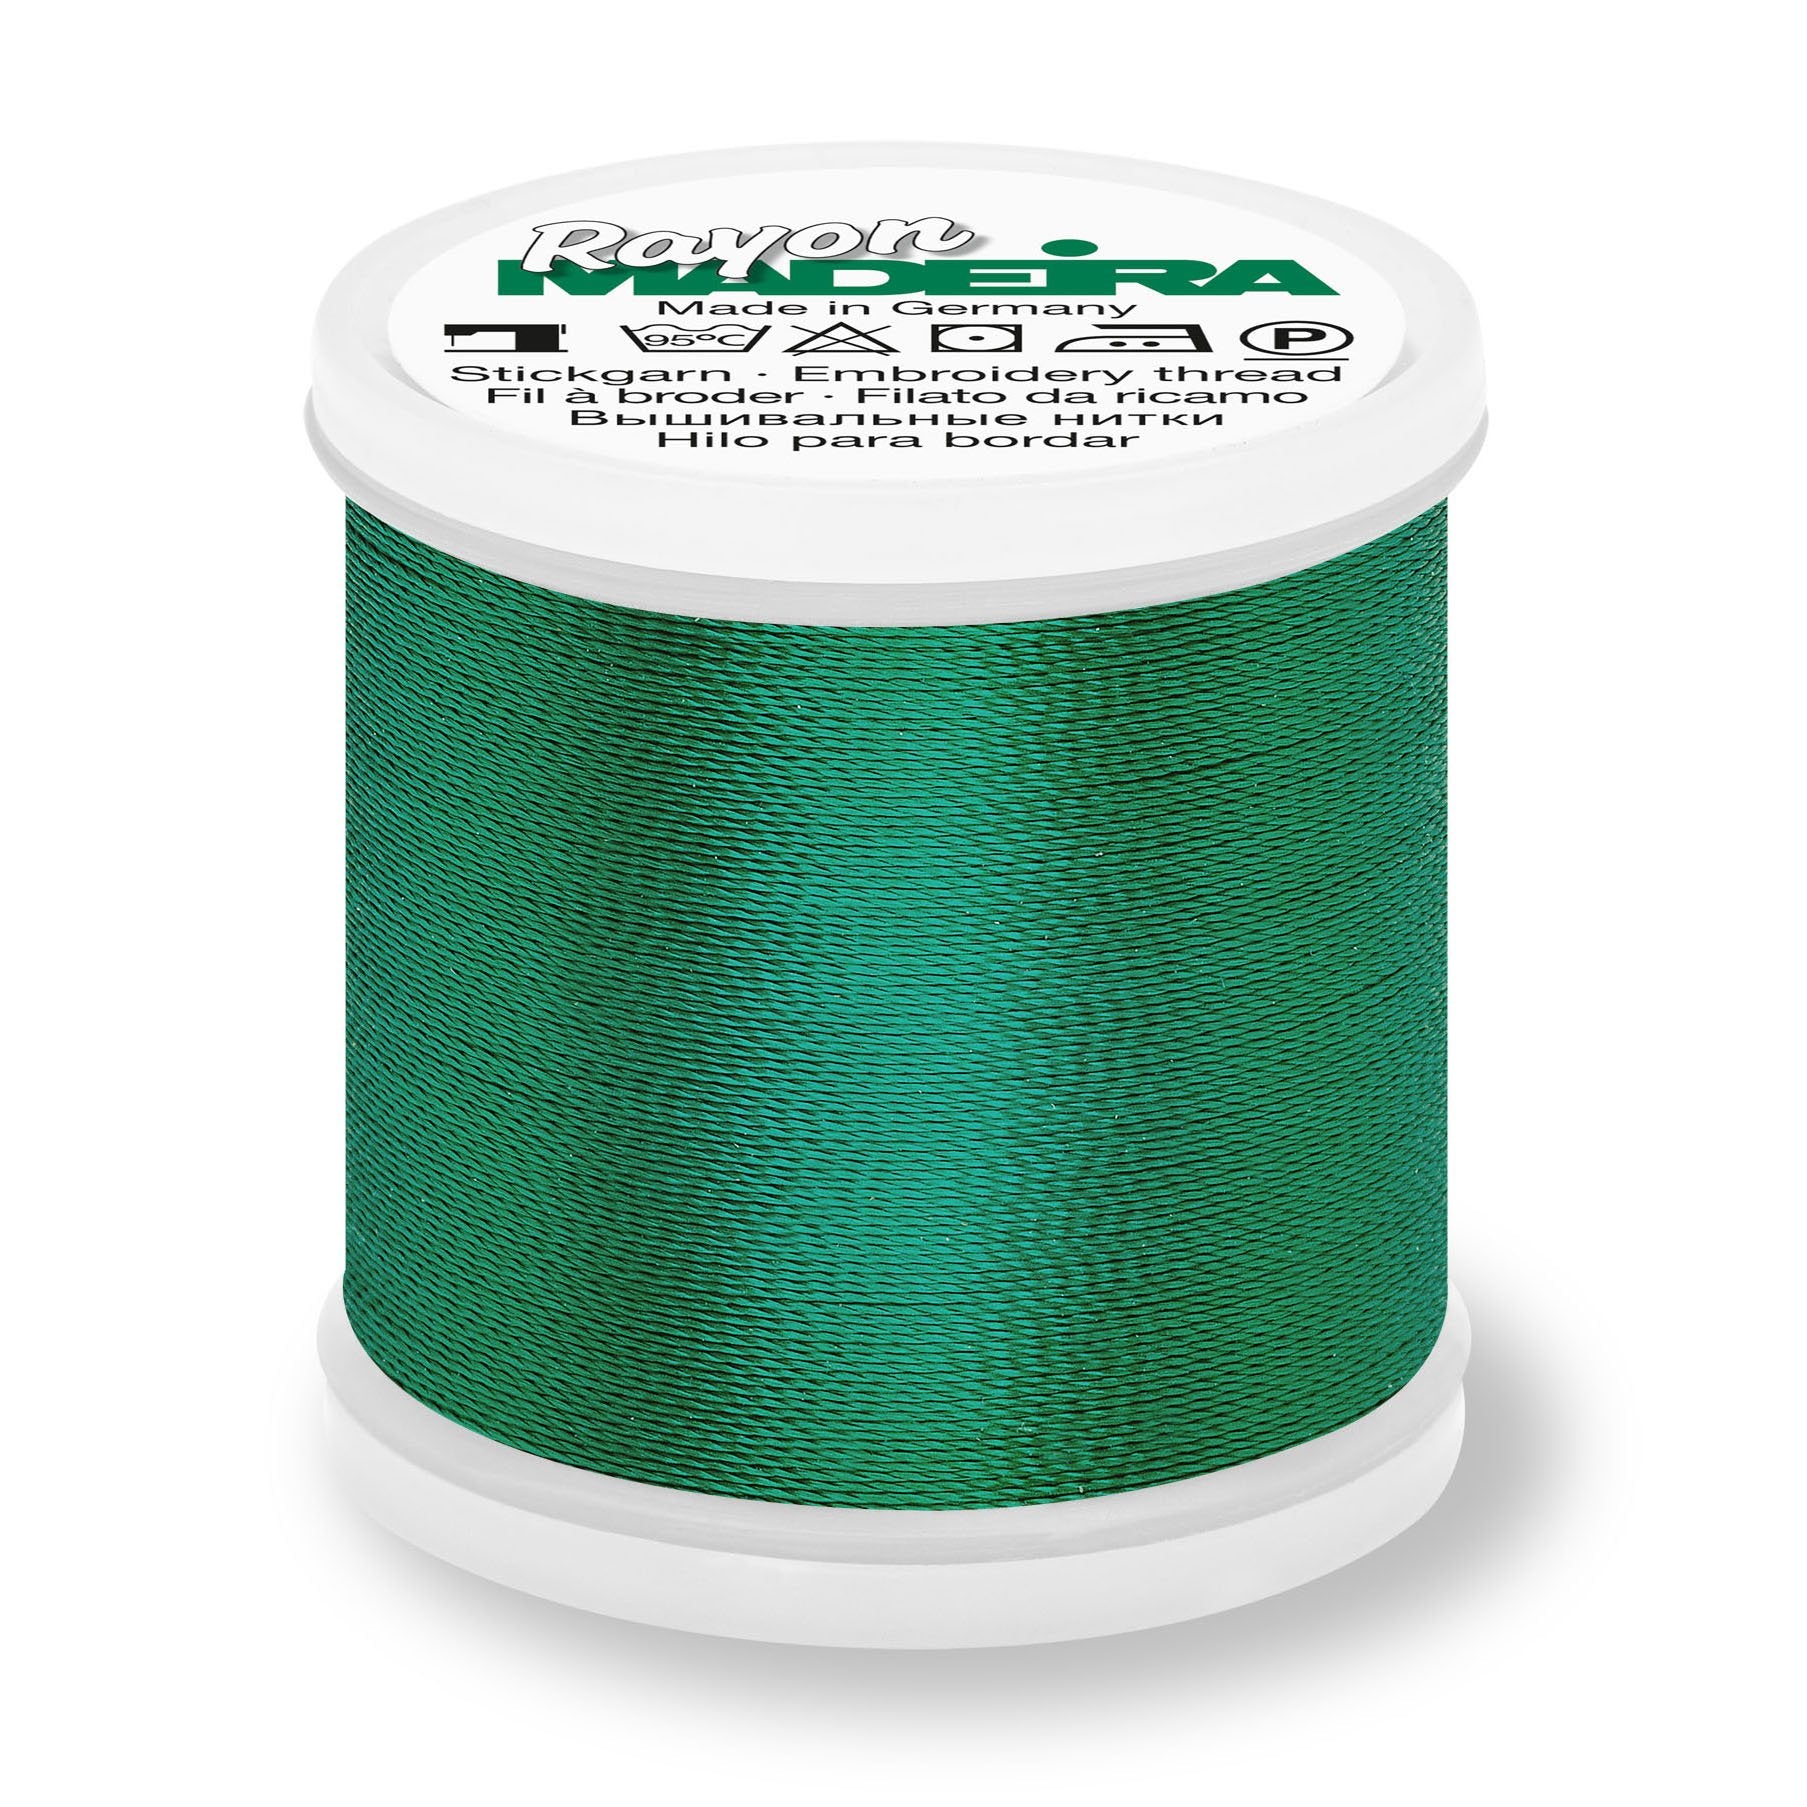 Madeira Rayon 40 Embroidery Thread 200m #1280 Mallard Green from Jaycotts Sewing Supplies